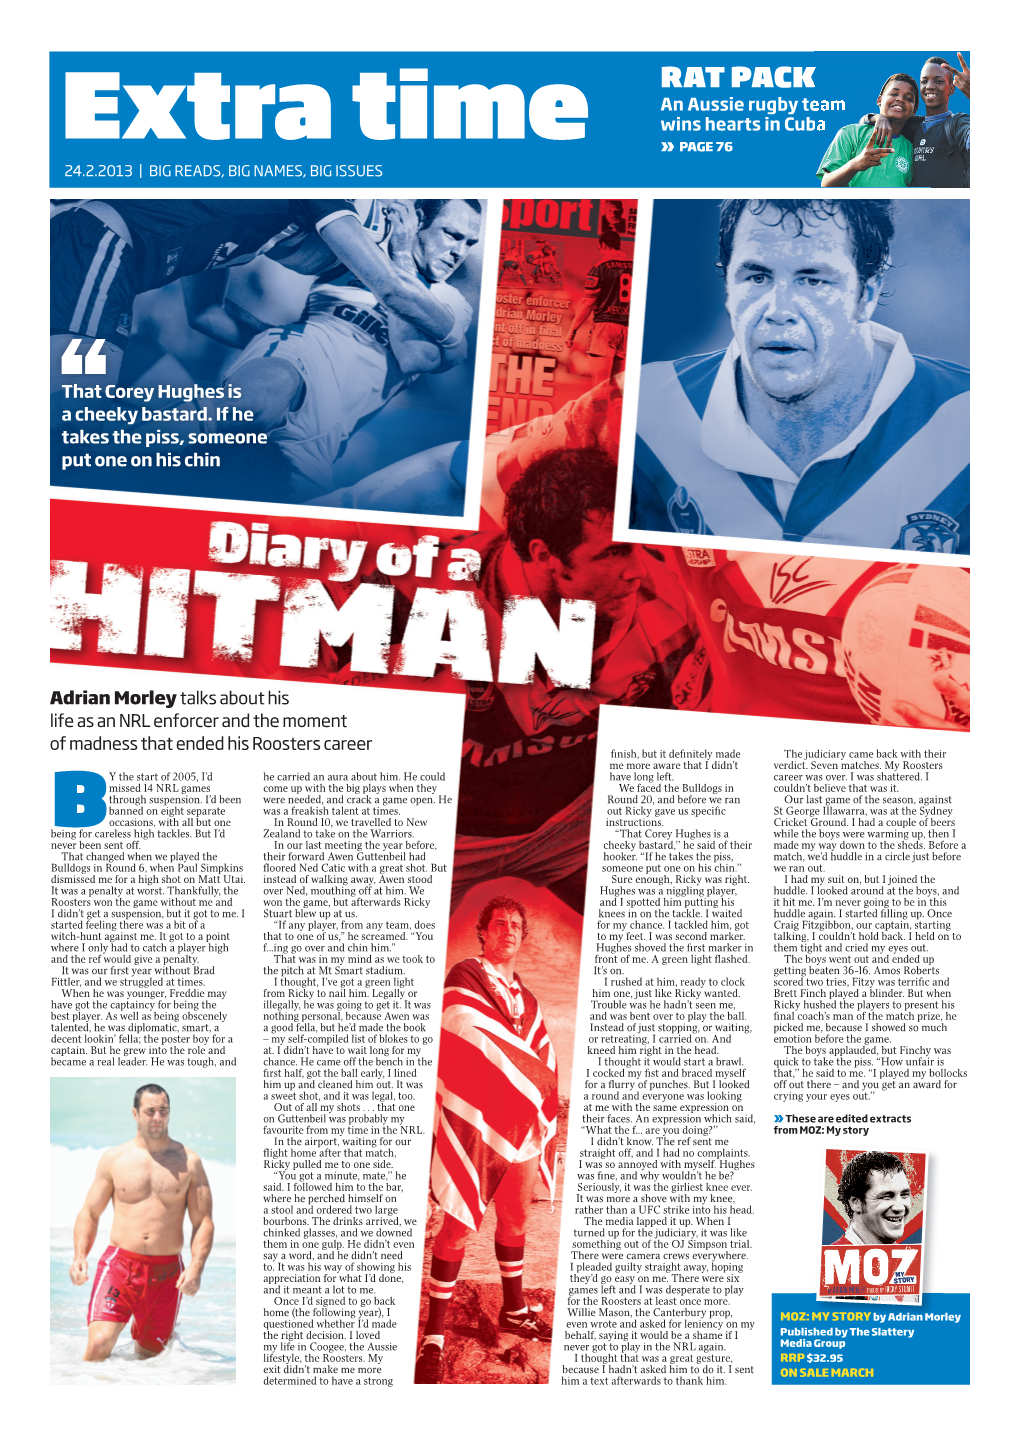 RAT PACK an Aussie Rugby Team Wins Hearts in Cuba Extra Time PAGE 76 ›› 24.2.2013 | BIG READS, BIG NAMES, BIG ISSUES